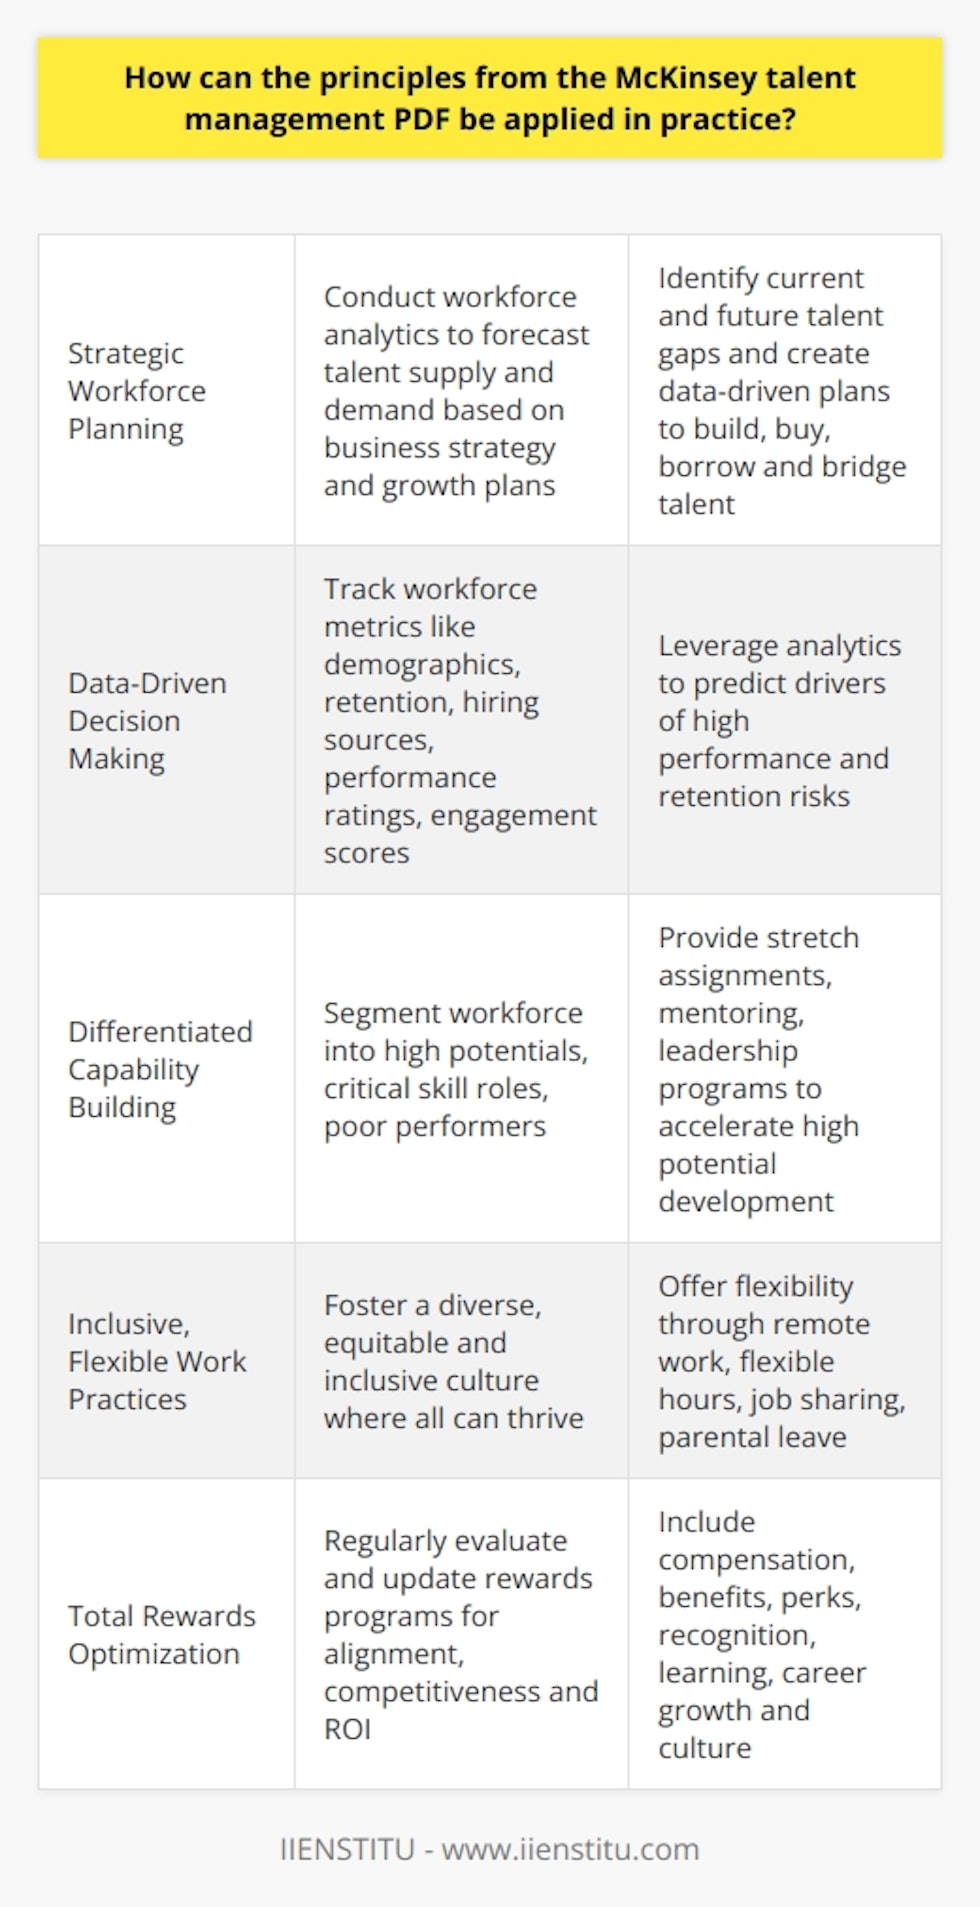 Here is some detailed content on applying McKinsey's talent management principles in practice:Strategic Workforce Planning- Conduct workforce analytics to forecast talent supply and demand based on business strategy and growth plans- Identify current and future talent gaps and create data-driven plans to build, buy, borrow and bridge talent - Develop robust succession plans for leadership and critical roles- Continuously monitor and update workforce plans as business needs evolveData-Driven Decision Making- Track workforce metrics like demographics, retention, hiring sources, performance ratings, engagement scores- Leverage analytics to predict drivers of high performance and retention risks- Use insights to guide decisions on recruiting, development, compensation, retention programsDifferentiated Capability Building- Segment workforce into high potentials, critical skill roles, poor performers- Provide stretch assignments, mentoring, leadership programs to accelerate high potential development - Upskill and reskill to close critical skill gaps - Manage underperformance through personalized coaching, training and performance managementInclusive, Flexible Work Practices- Foster a diverse, equitable and inclusive culture where all can thrive- Offer flexibility through remote work, flexible hours, job sharing, parental leave- Design workspaces to enable collaboration, ergonomics, health and wellbeingTotal Rewards Optimization- Regularly evaluate and update rewards programs for alignment, competitiveness and ROI- Include compensation, benefits, perks, recognition, learning, career growth and culture- Differentiate rewards based on performance and potential to boost engagement and retentionThe focus is on integrated talent strategies powered by data-driven insights to build organizational capabilities and an engaging employee experience. This ultimately drives business performance.